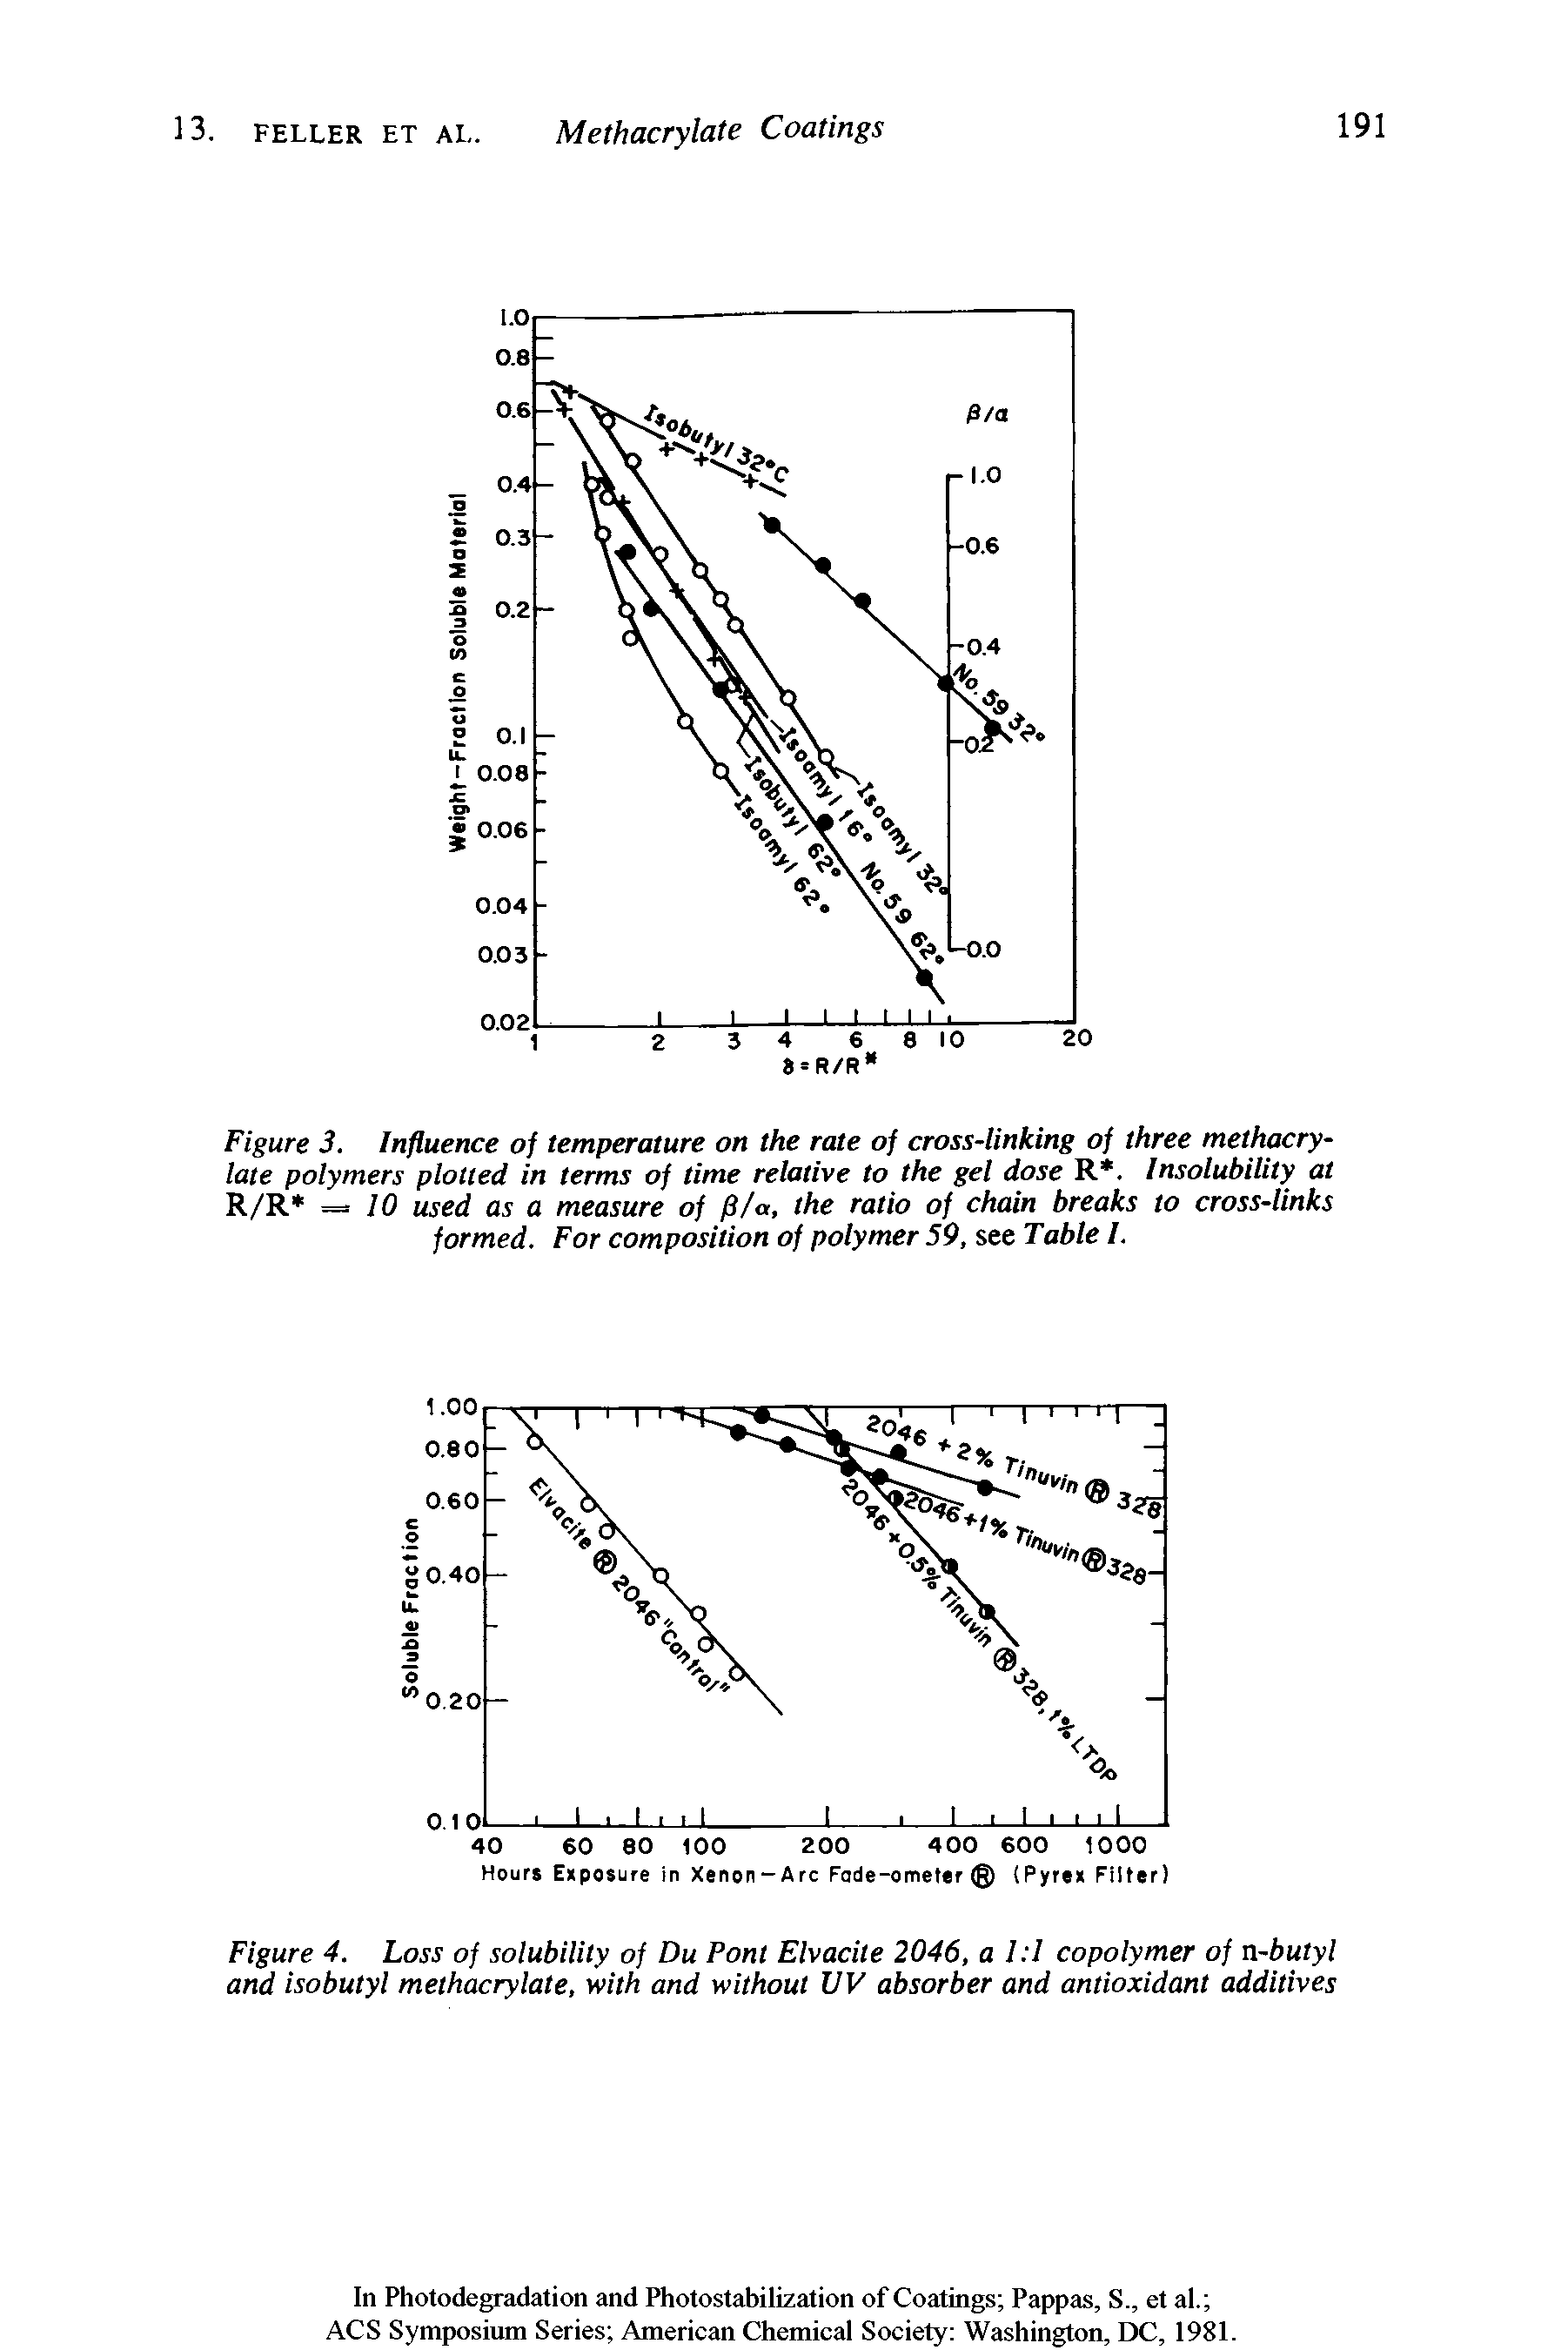 Figure 3. Influence of temperature on the rate of cross-linking of three methacrylate polymers plotted in terms of time relative to the gel dose R. Insolubility at R/R = 10 used as a measure of fl/a, the ratio of chain breaks to cross-links formed. For composition of polymer 59, see Table I.